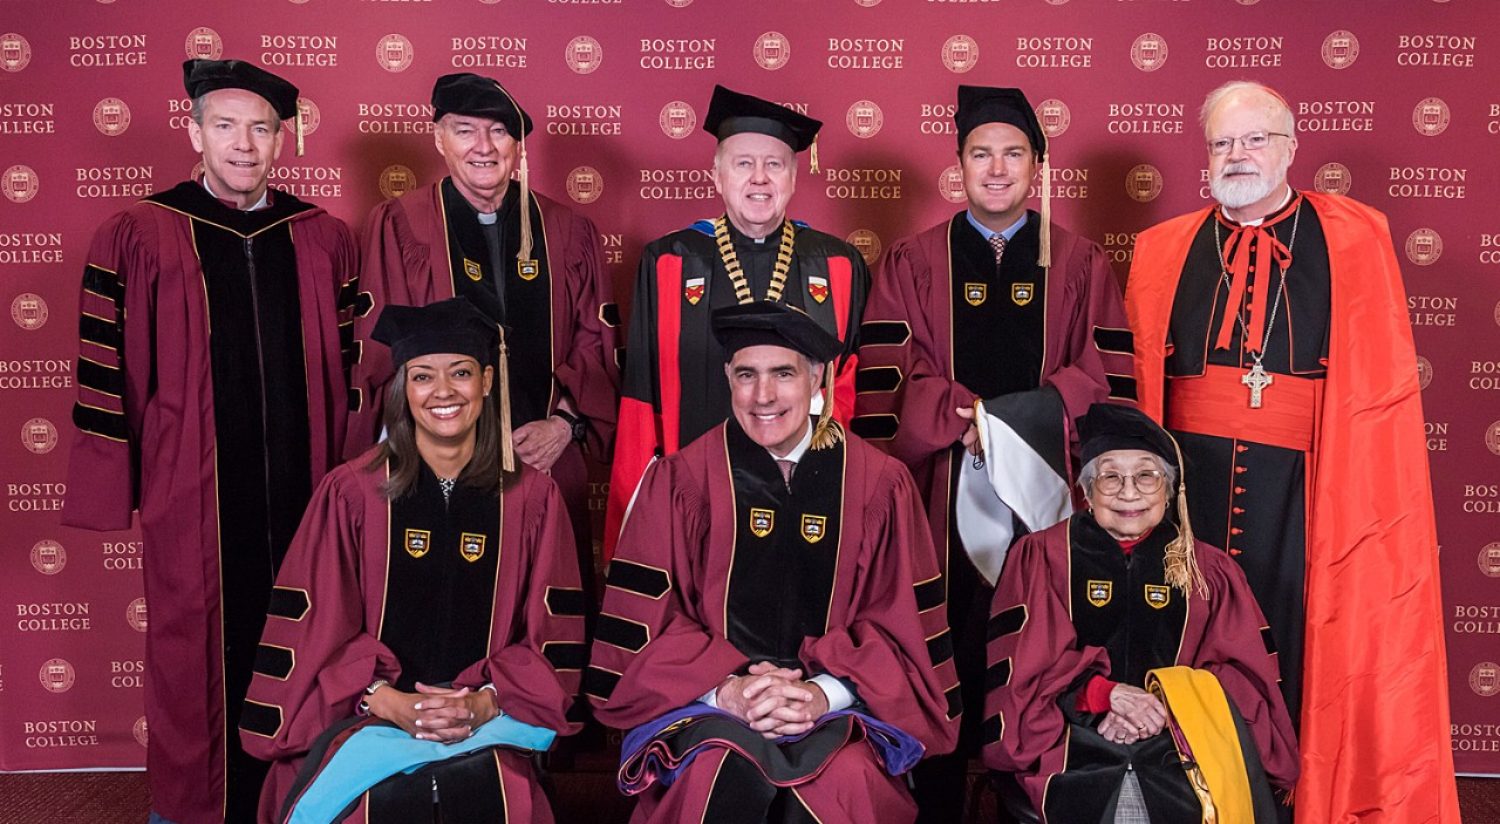 Boston College honorary degree recipients - Commencement 2018